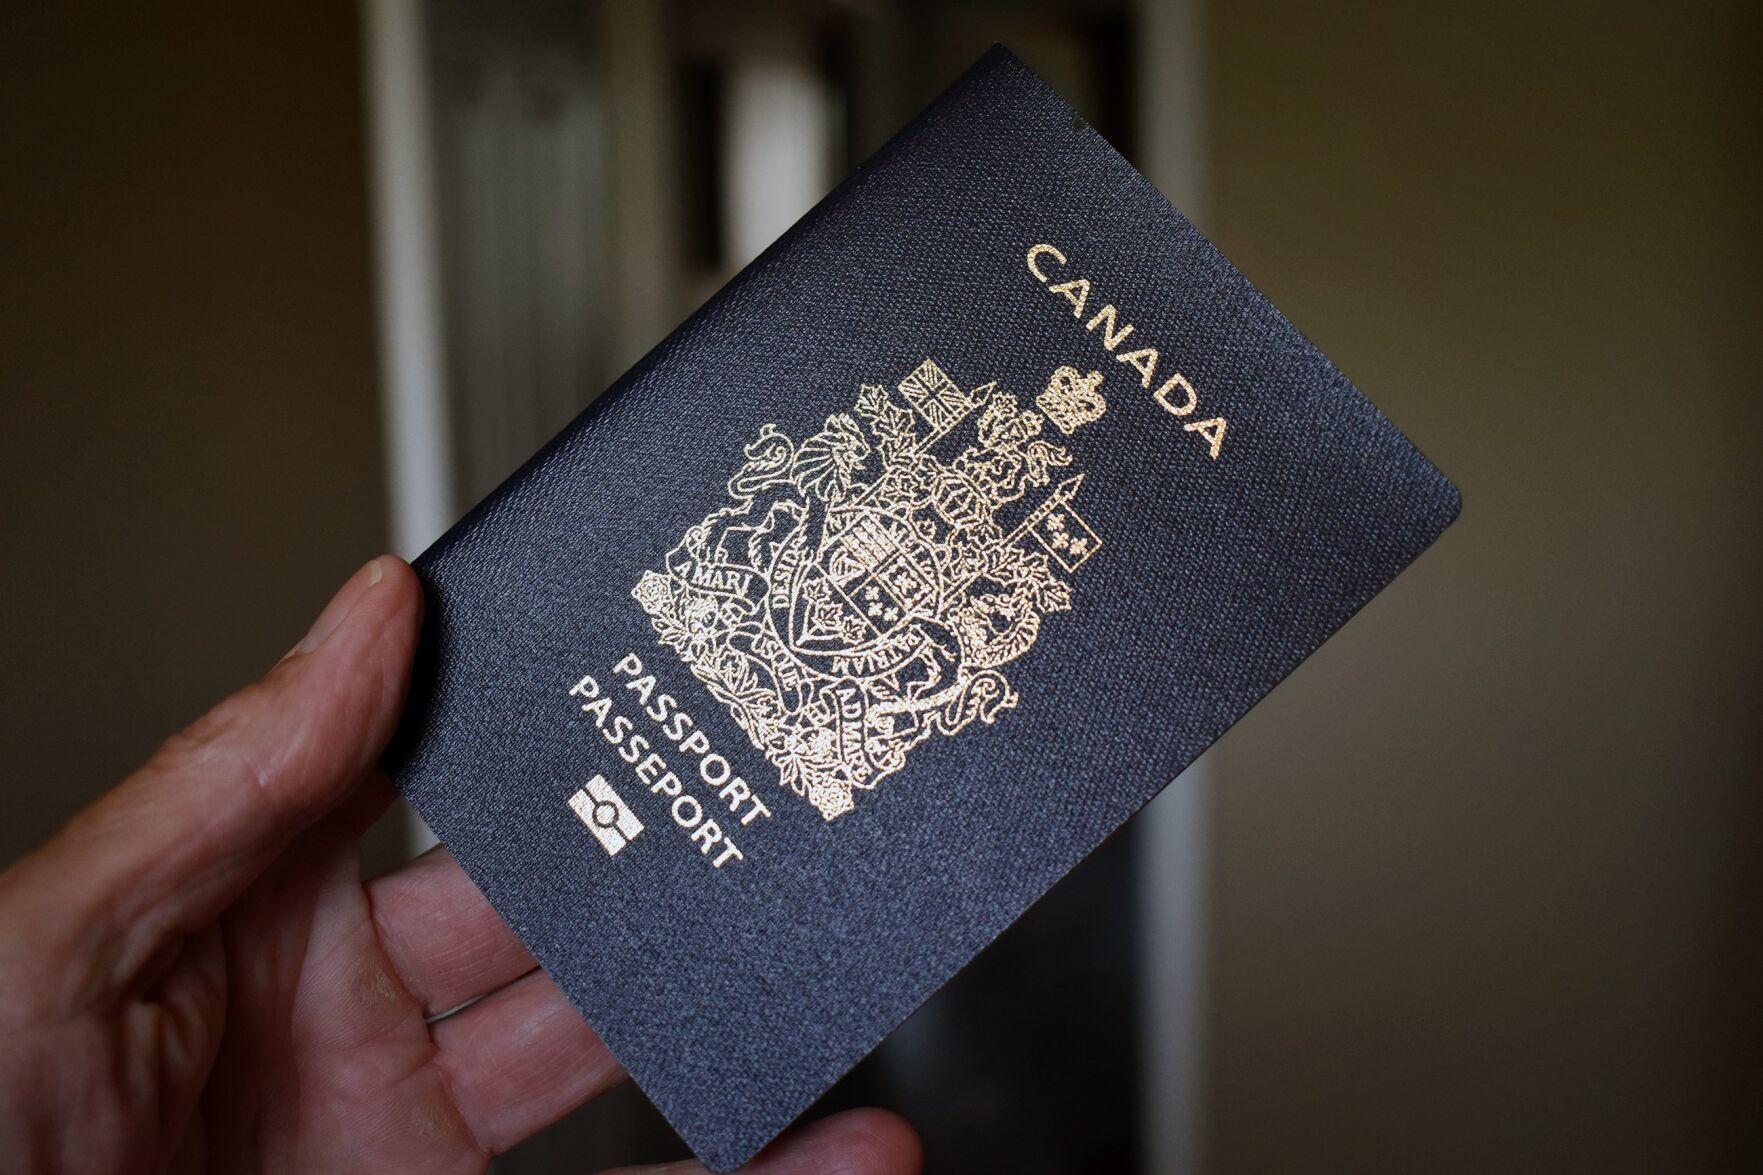 DID YOU KNOW You can apply for a Canadian passport in Caledon?